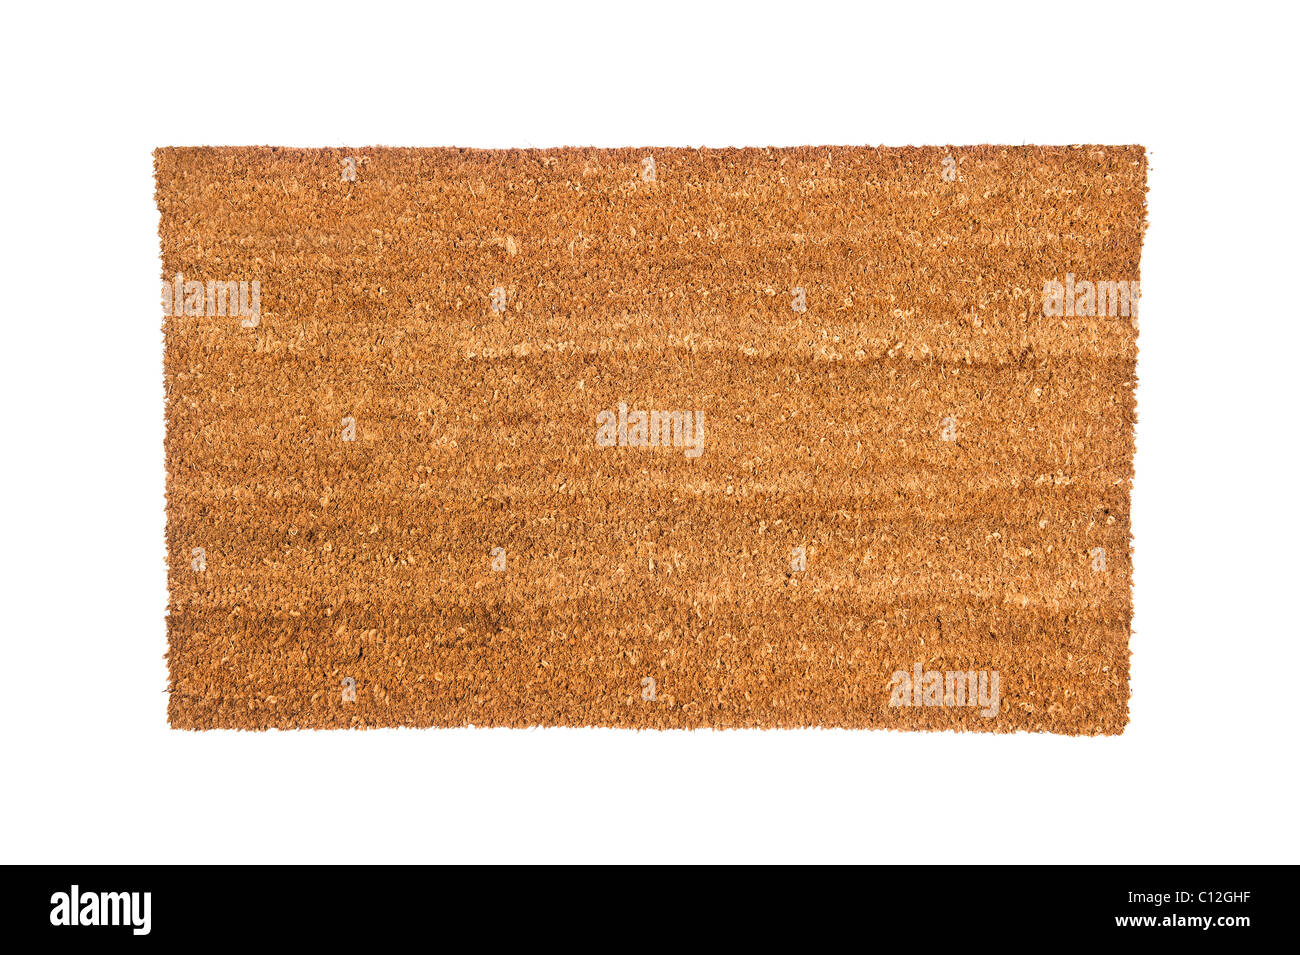 A plain brown doormat isolated on white. Designed can use to place any copy on top of the mat. Stock Photo